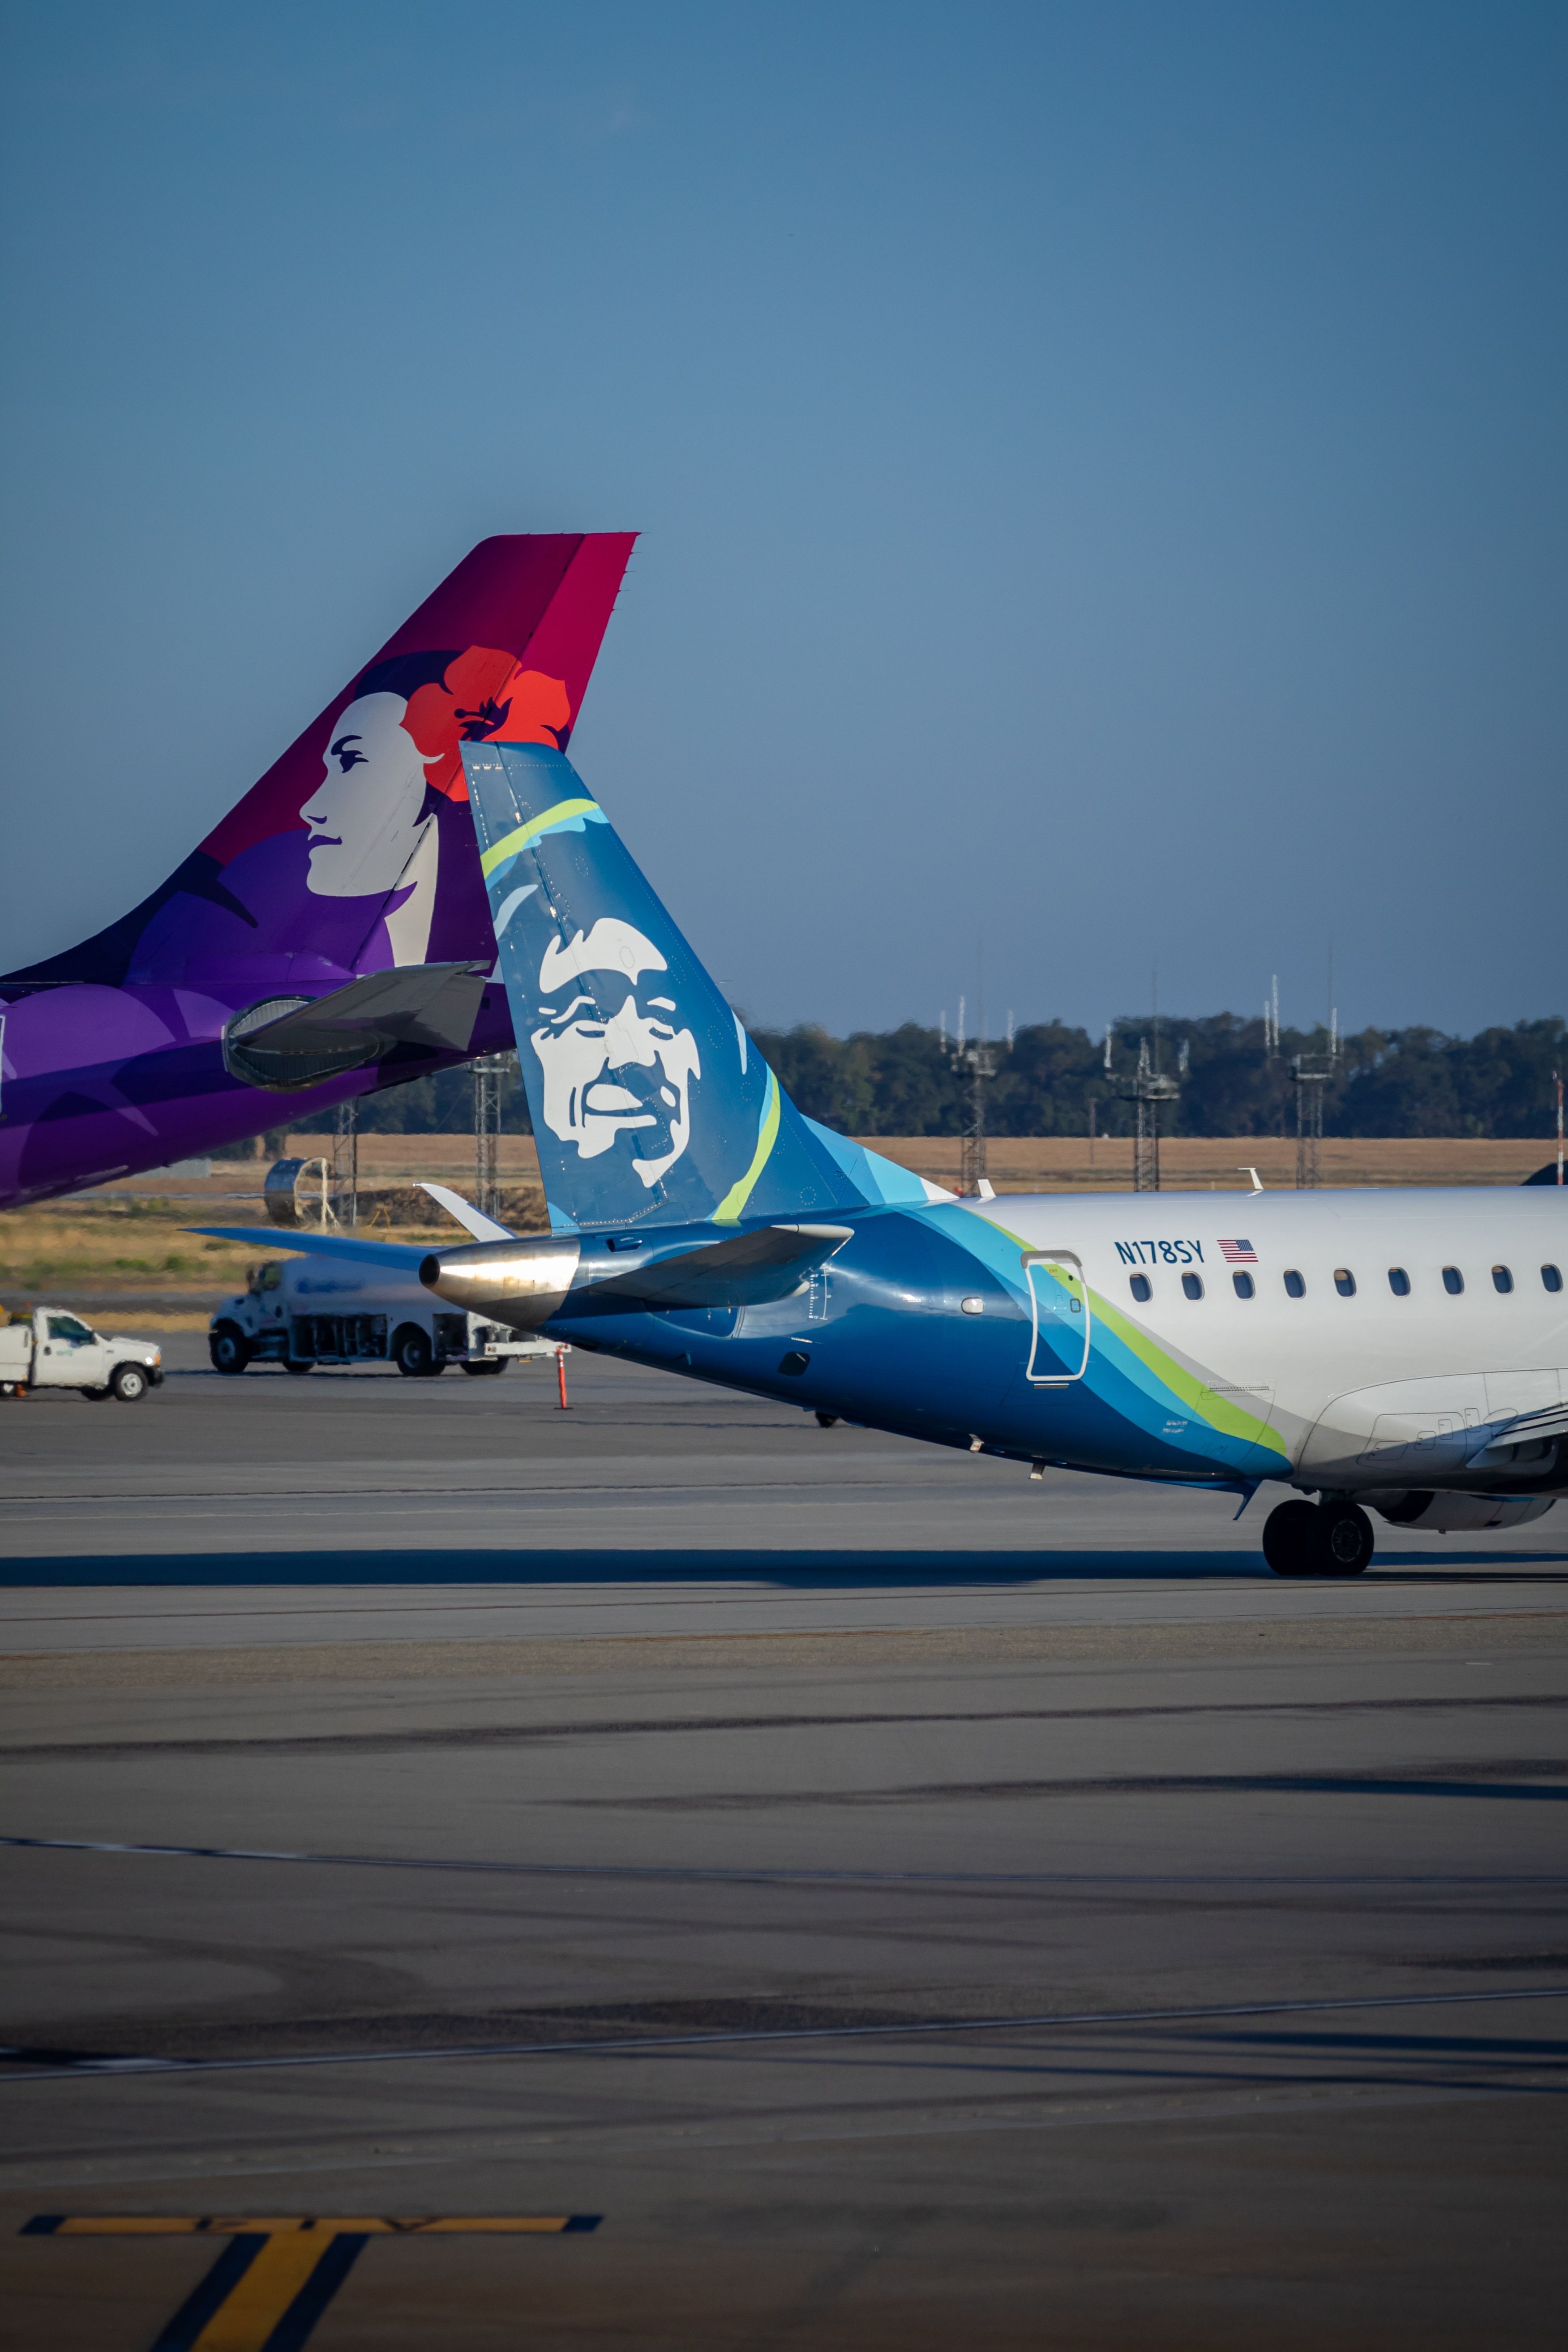 shutterstock_2121442103 - Hawaiian Airlines A330 tail and Alaska Air Group E175 tail